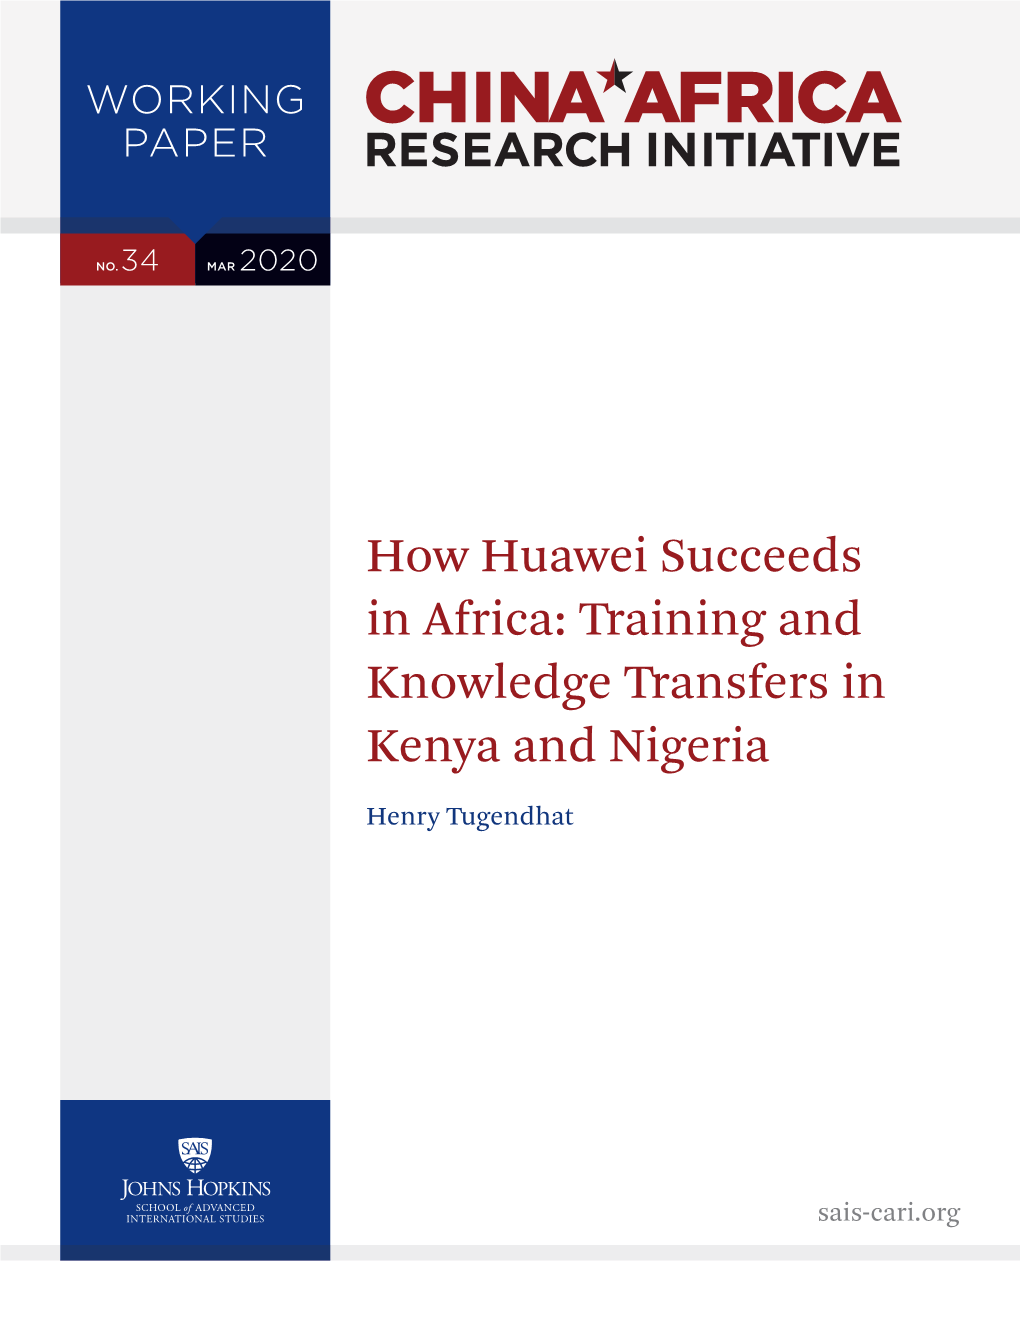 How Huawei Succeeds in Africa: Training and Knowledge Transfers in Kenya and Nigeria